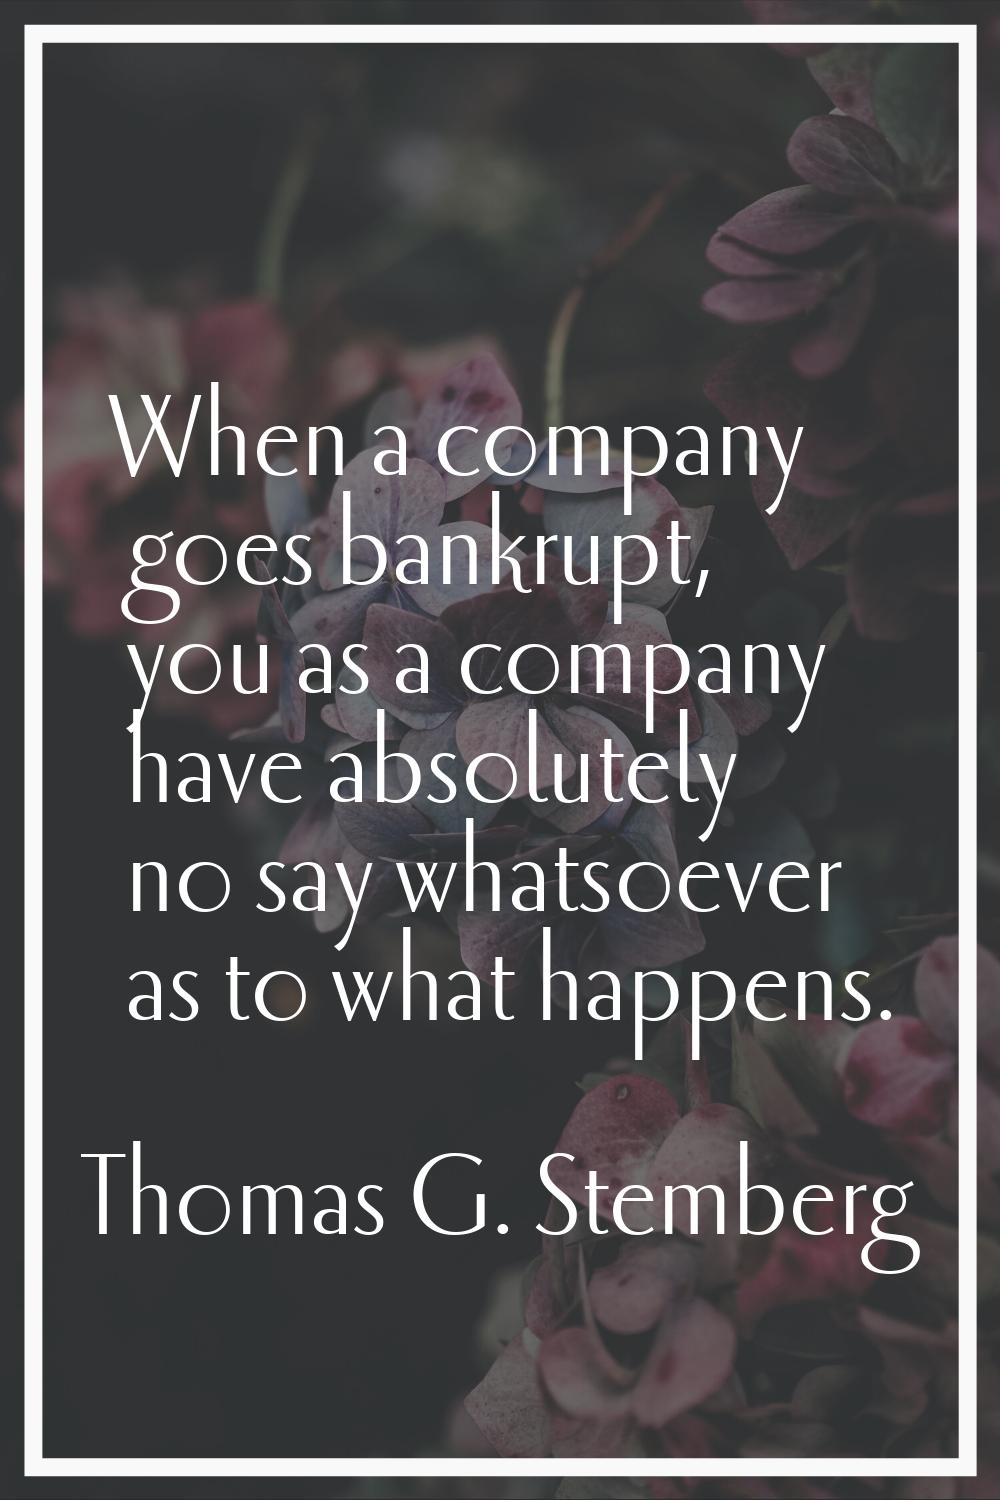 When a company goes bankrupt, you as a company have absolutely no say whatsoever as to what happens